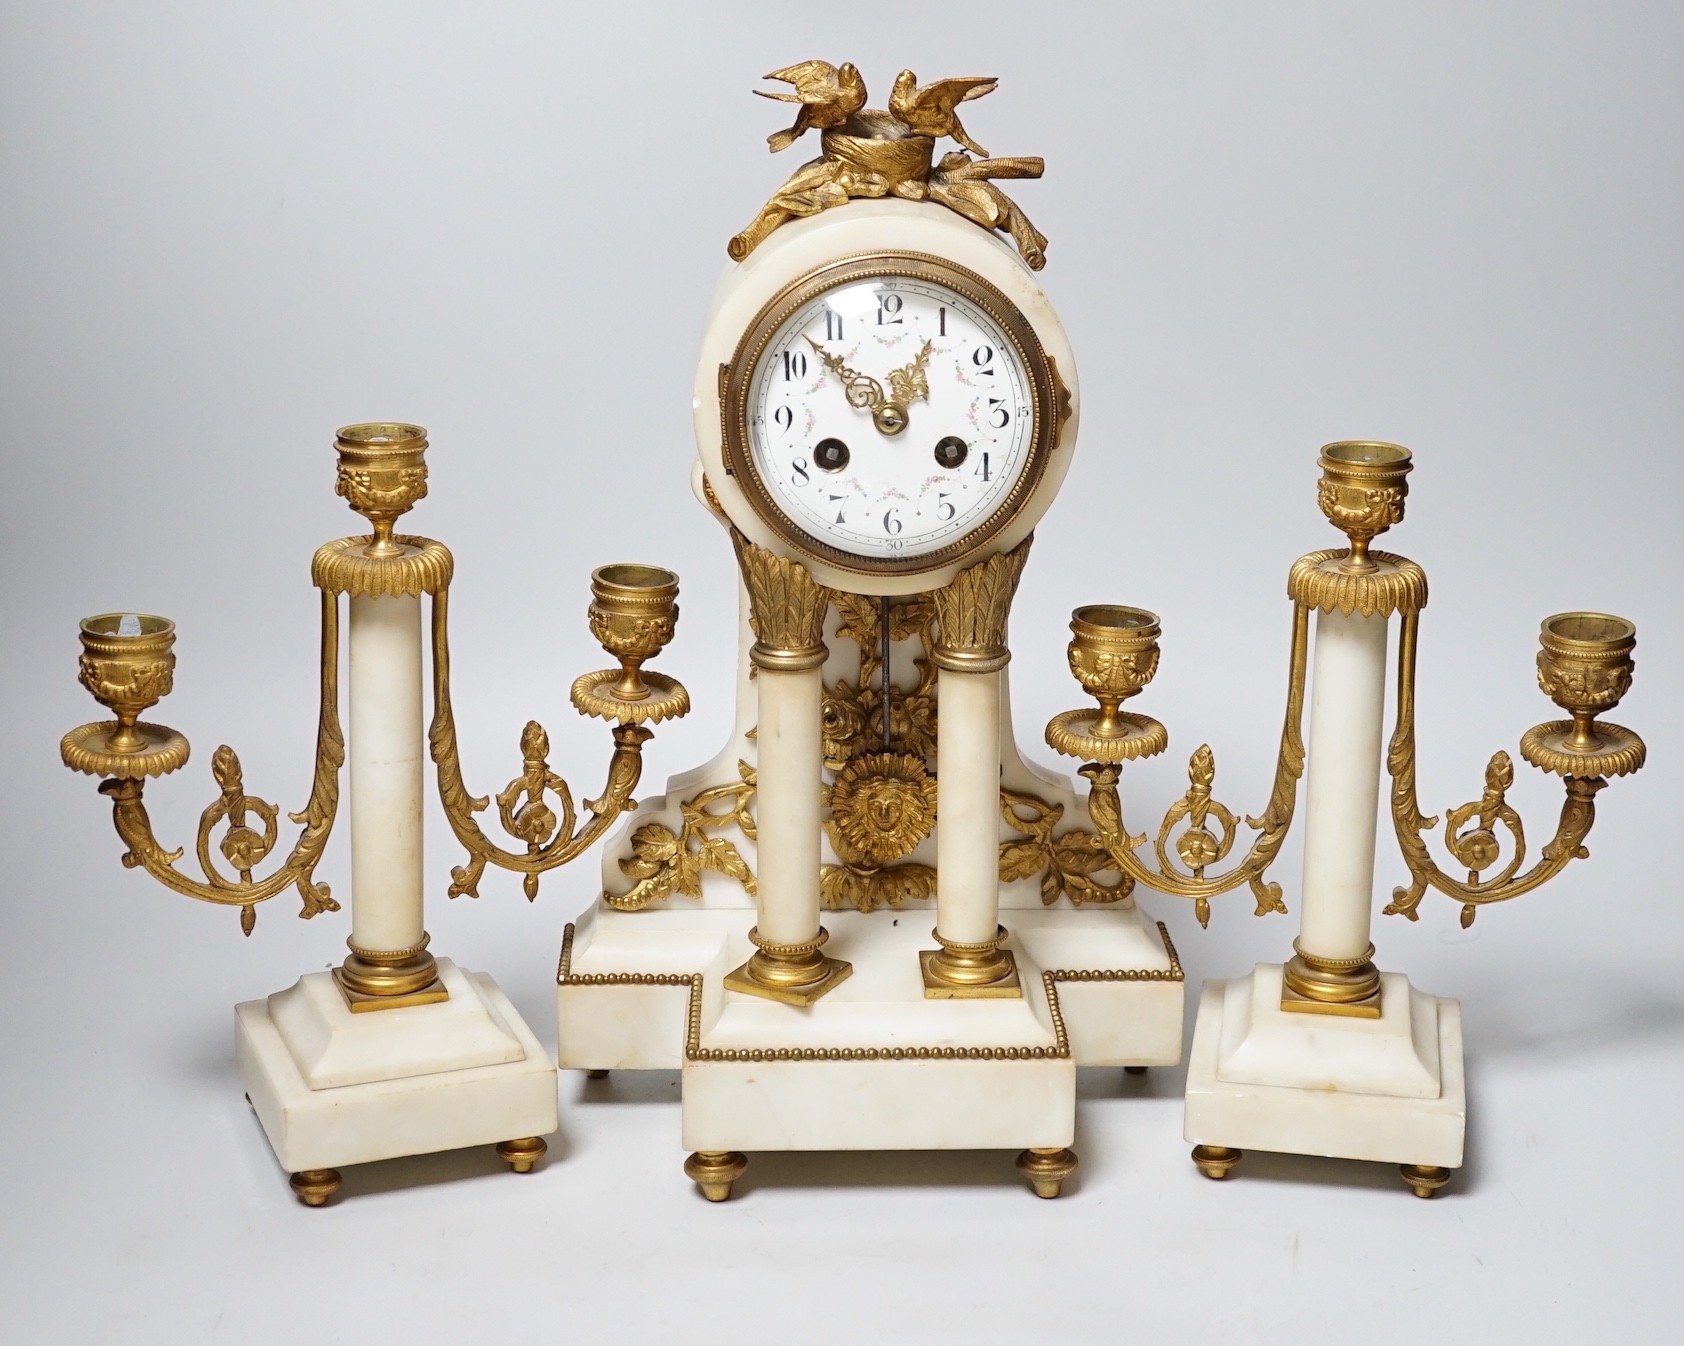 A 19th century alabaster clock garniture, French movement count-wheel striking on a bell, clock 34cm